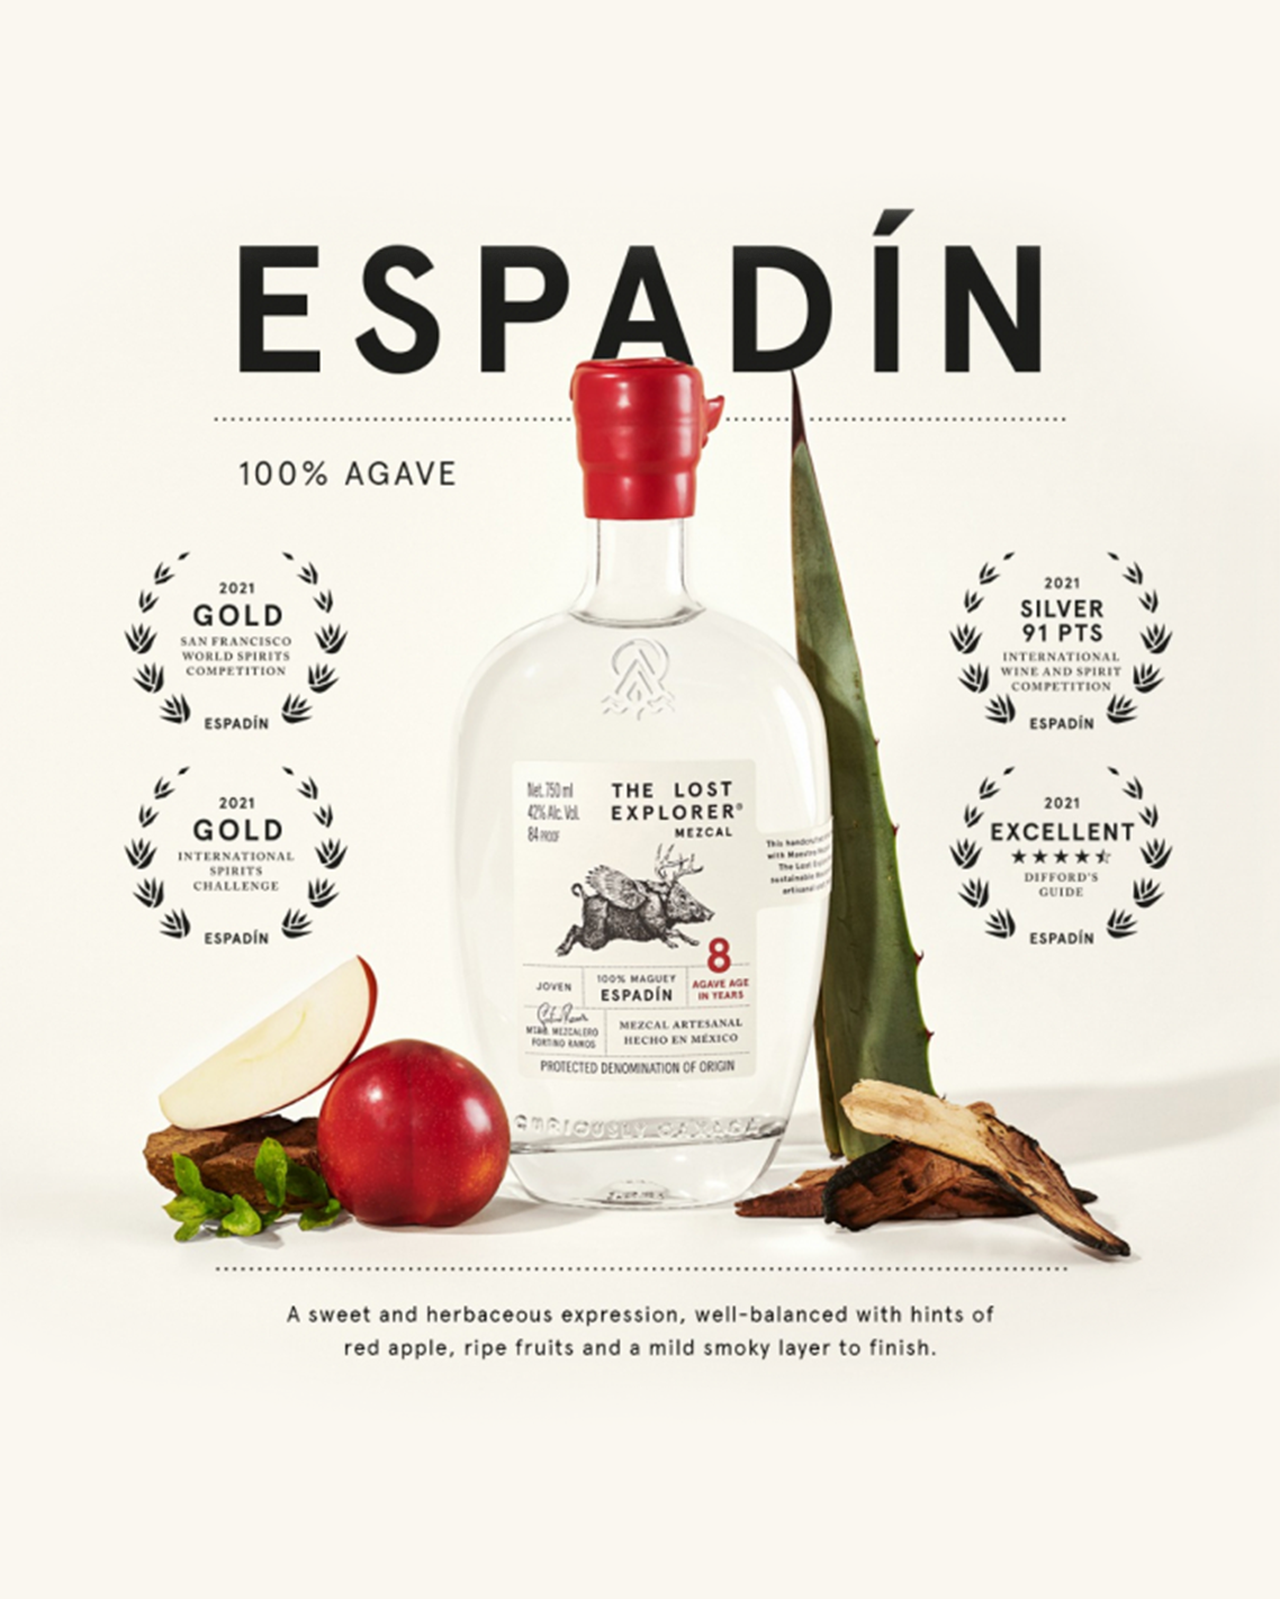 An image of The Lost Explorer Mezcal bottle of Espadin - A sweet and herbaceous expression, well-balanced with hints of red apple, ripe fruits and a mild smoky layer to finish.